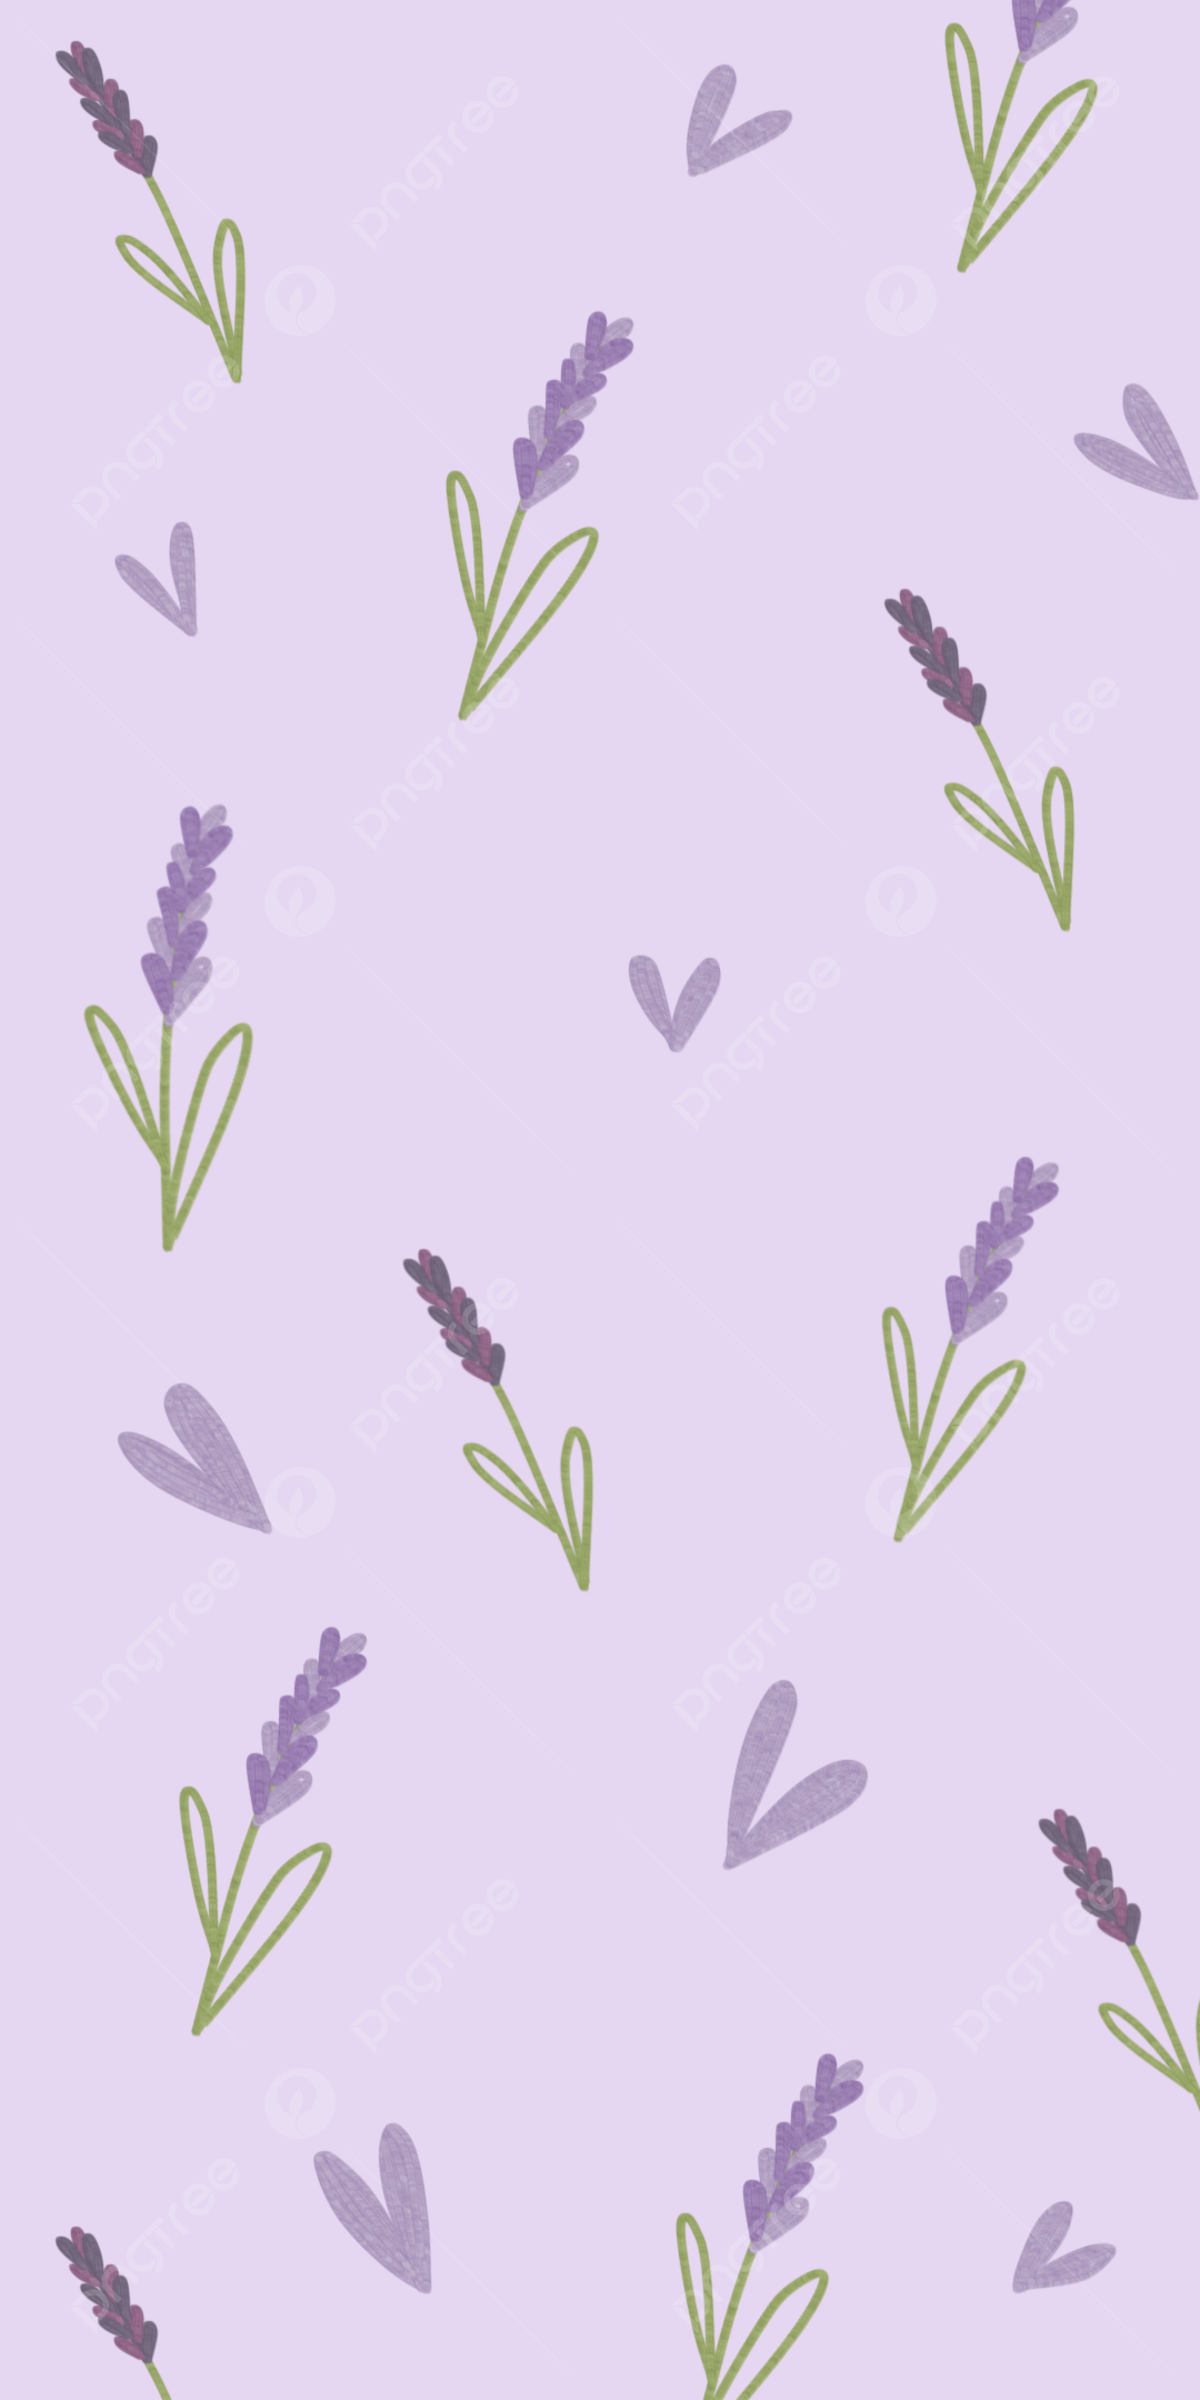 Lavender wallpapers background wallpapers purple simple background image for free download